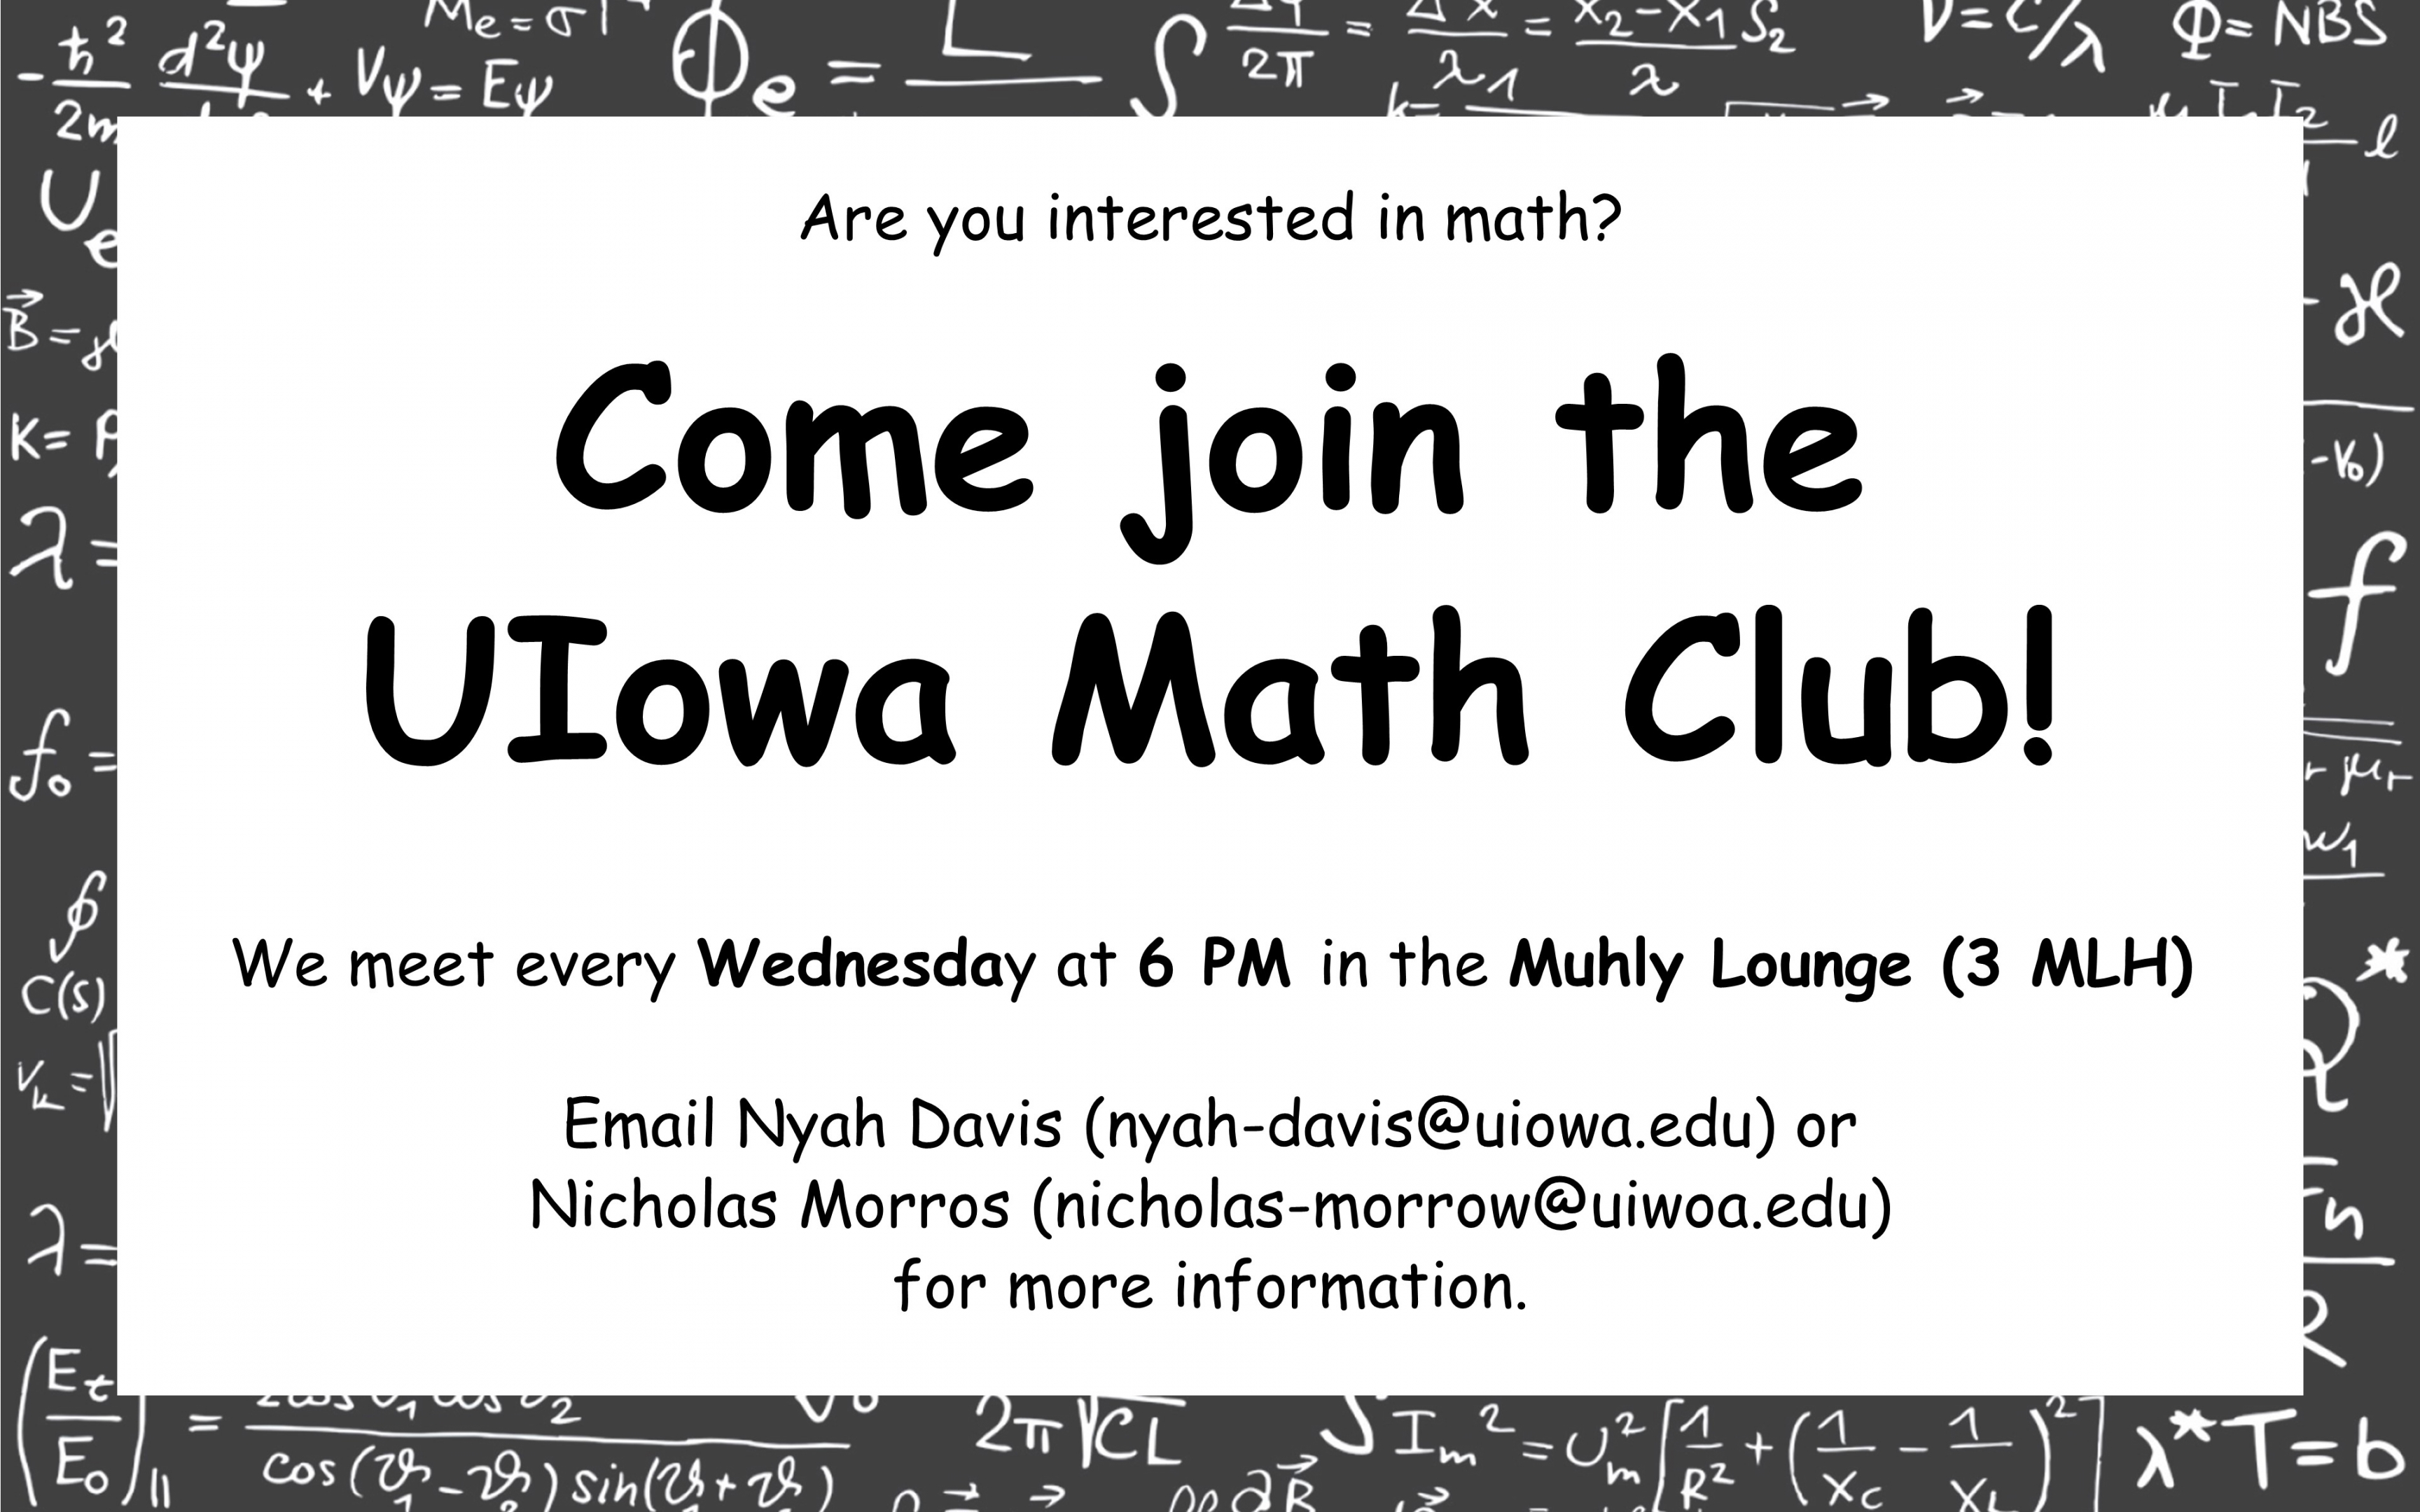 Are you interest in math? Come join the UIowa Math Club! We meet every Wednesday at 6 PM in the Muhly Lounge (3 MLH) Email Nyah Davis (nyah-davis@uiowa.edu) or Nicholas Morrow (nicholas-morrow@uiowa.edu) for more information